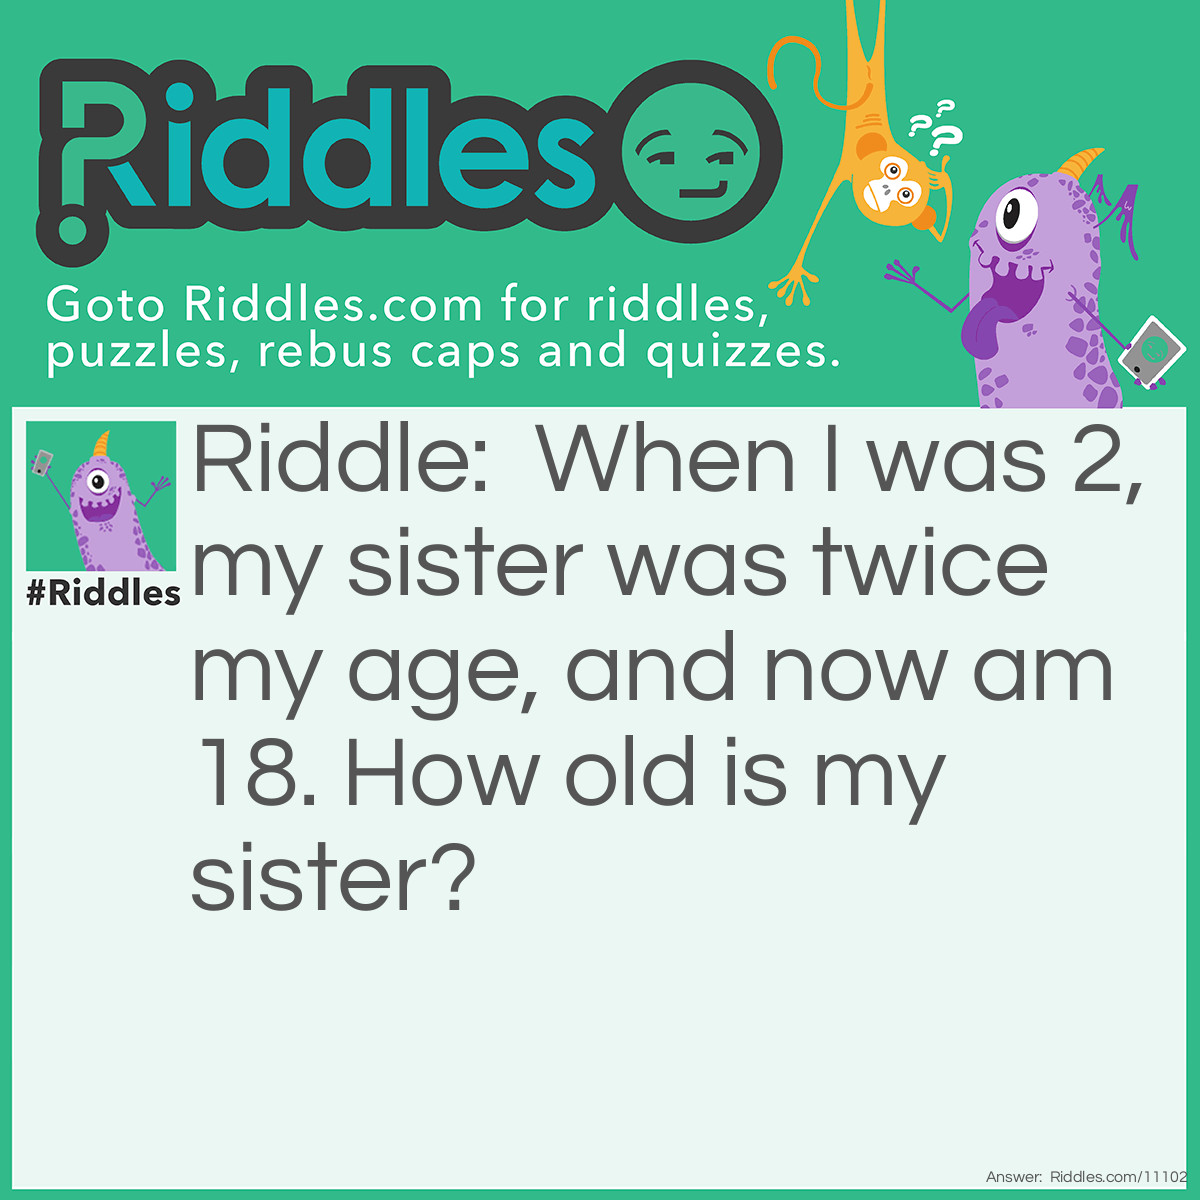 Riddle: When I was 2, my sister was twice my age, and now am 18. How old is my sister? Answer: 20.